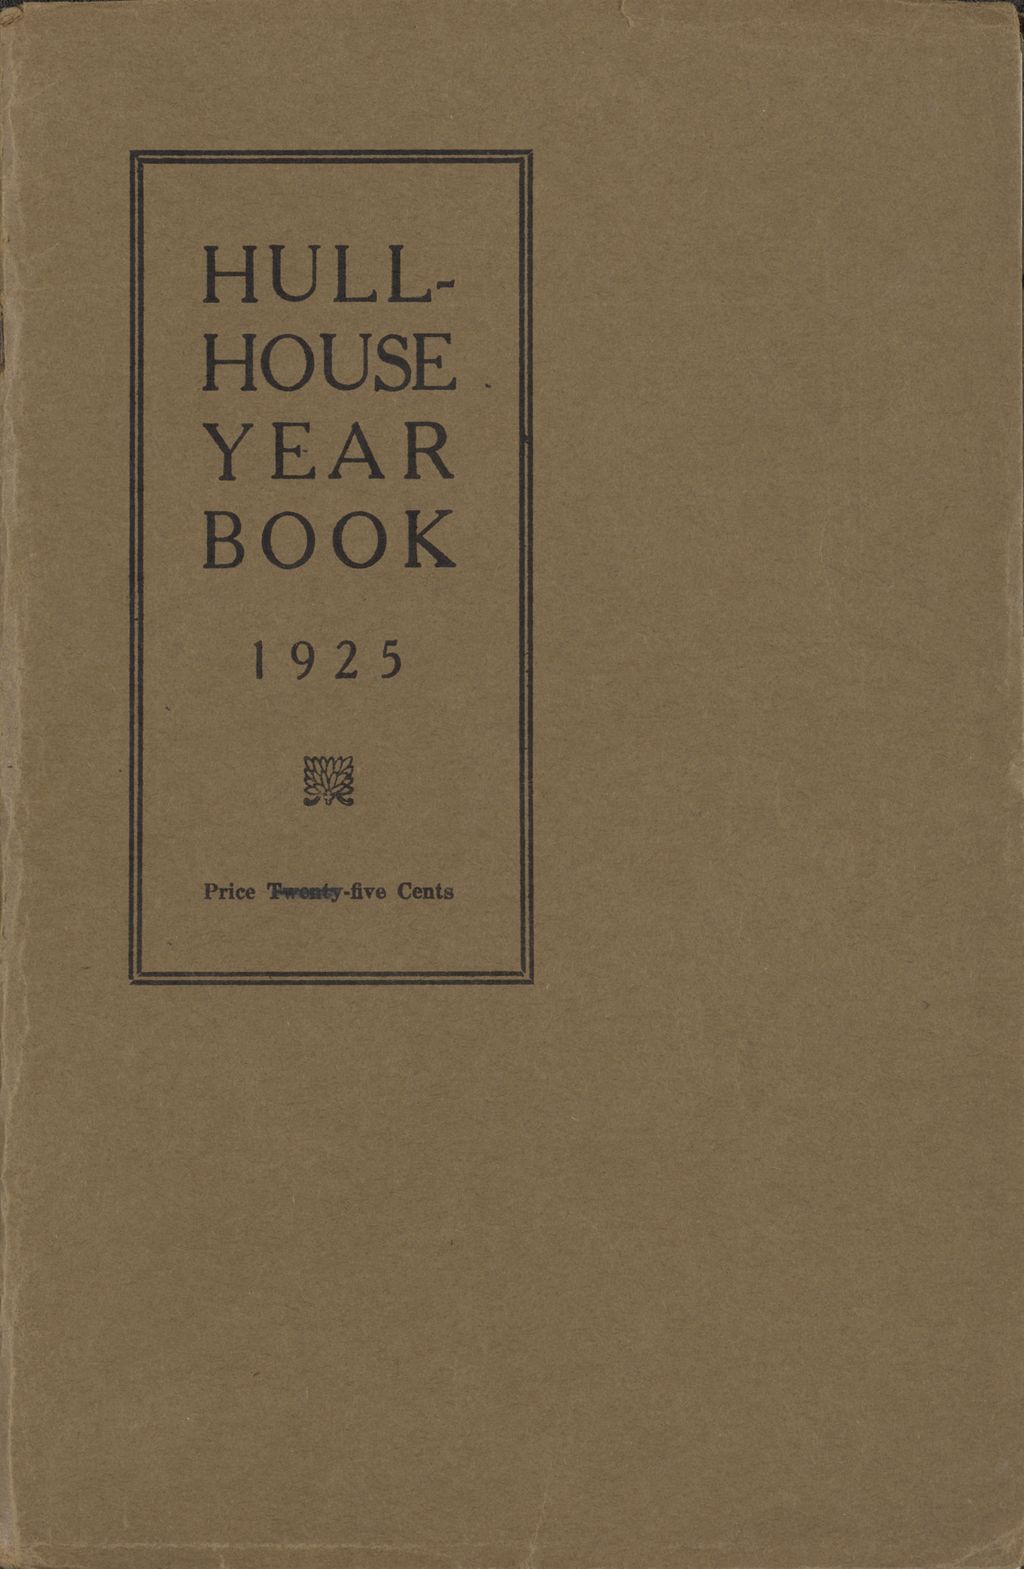 Miniature of Hull-House Year Book, 1925